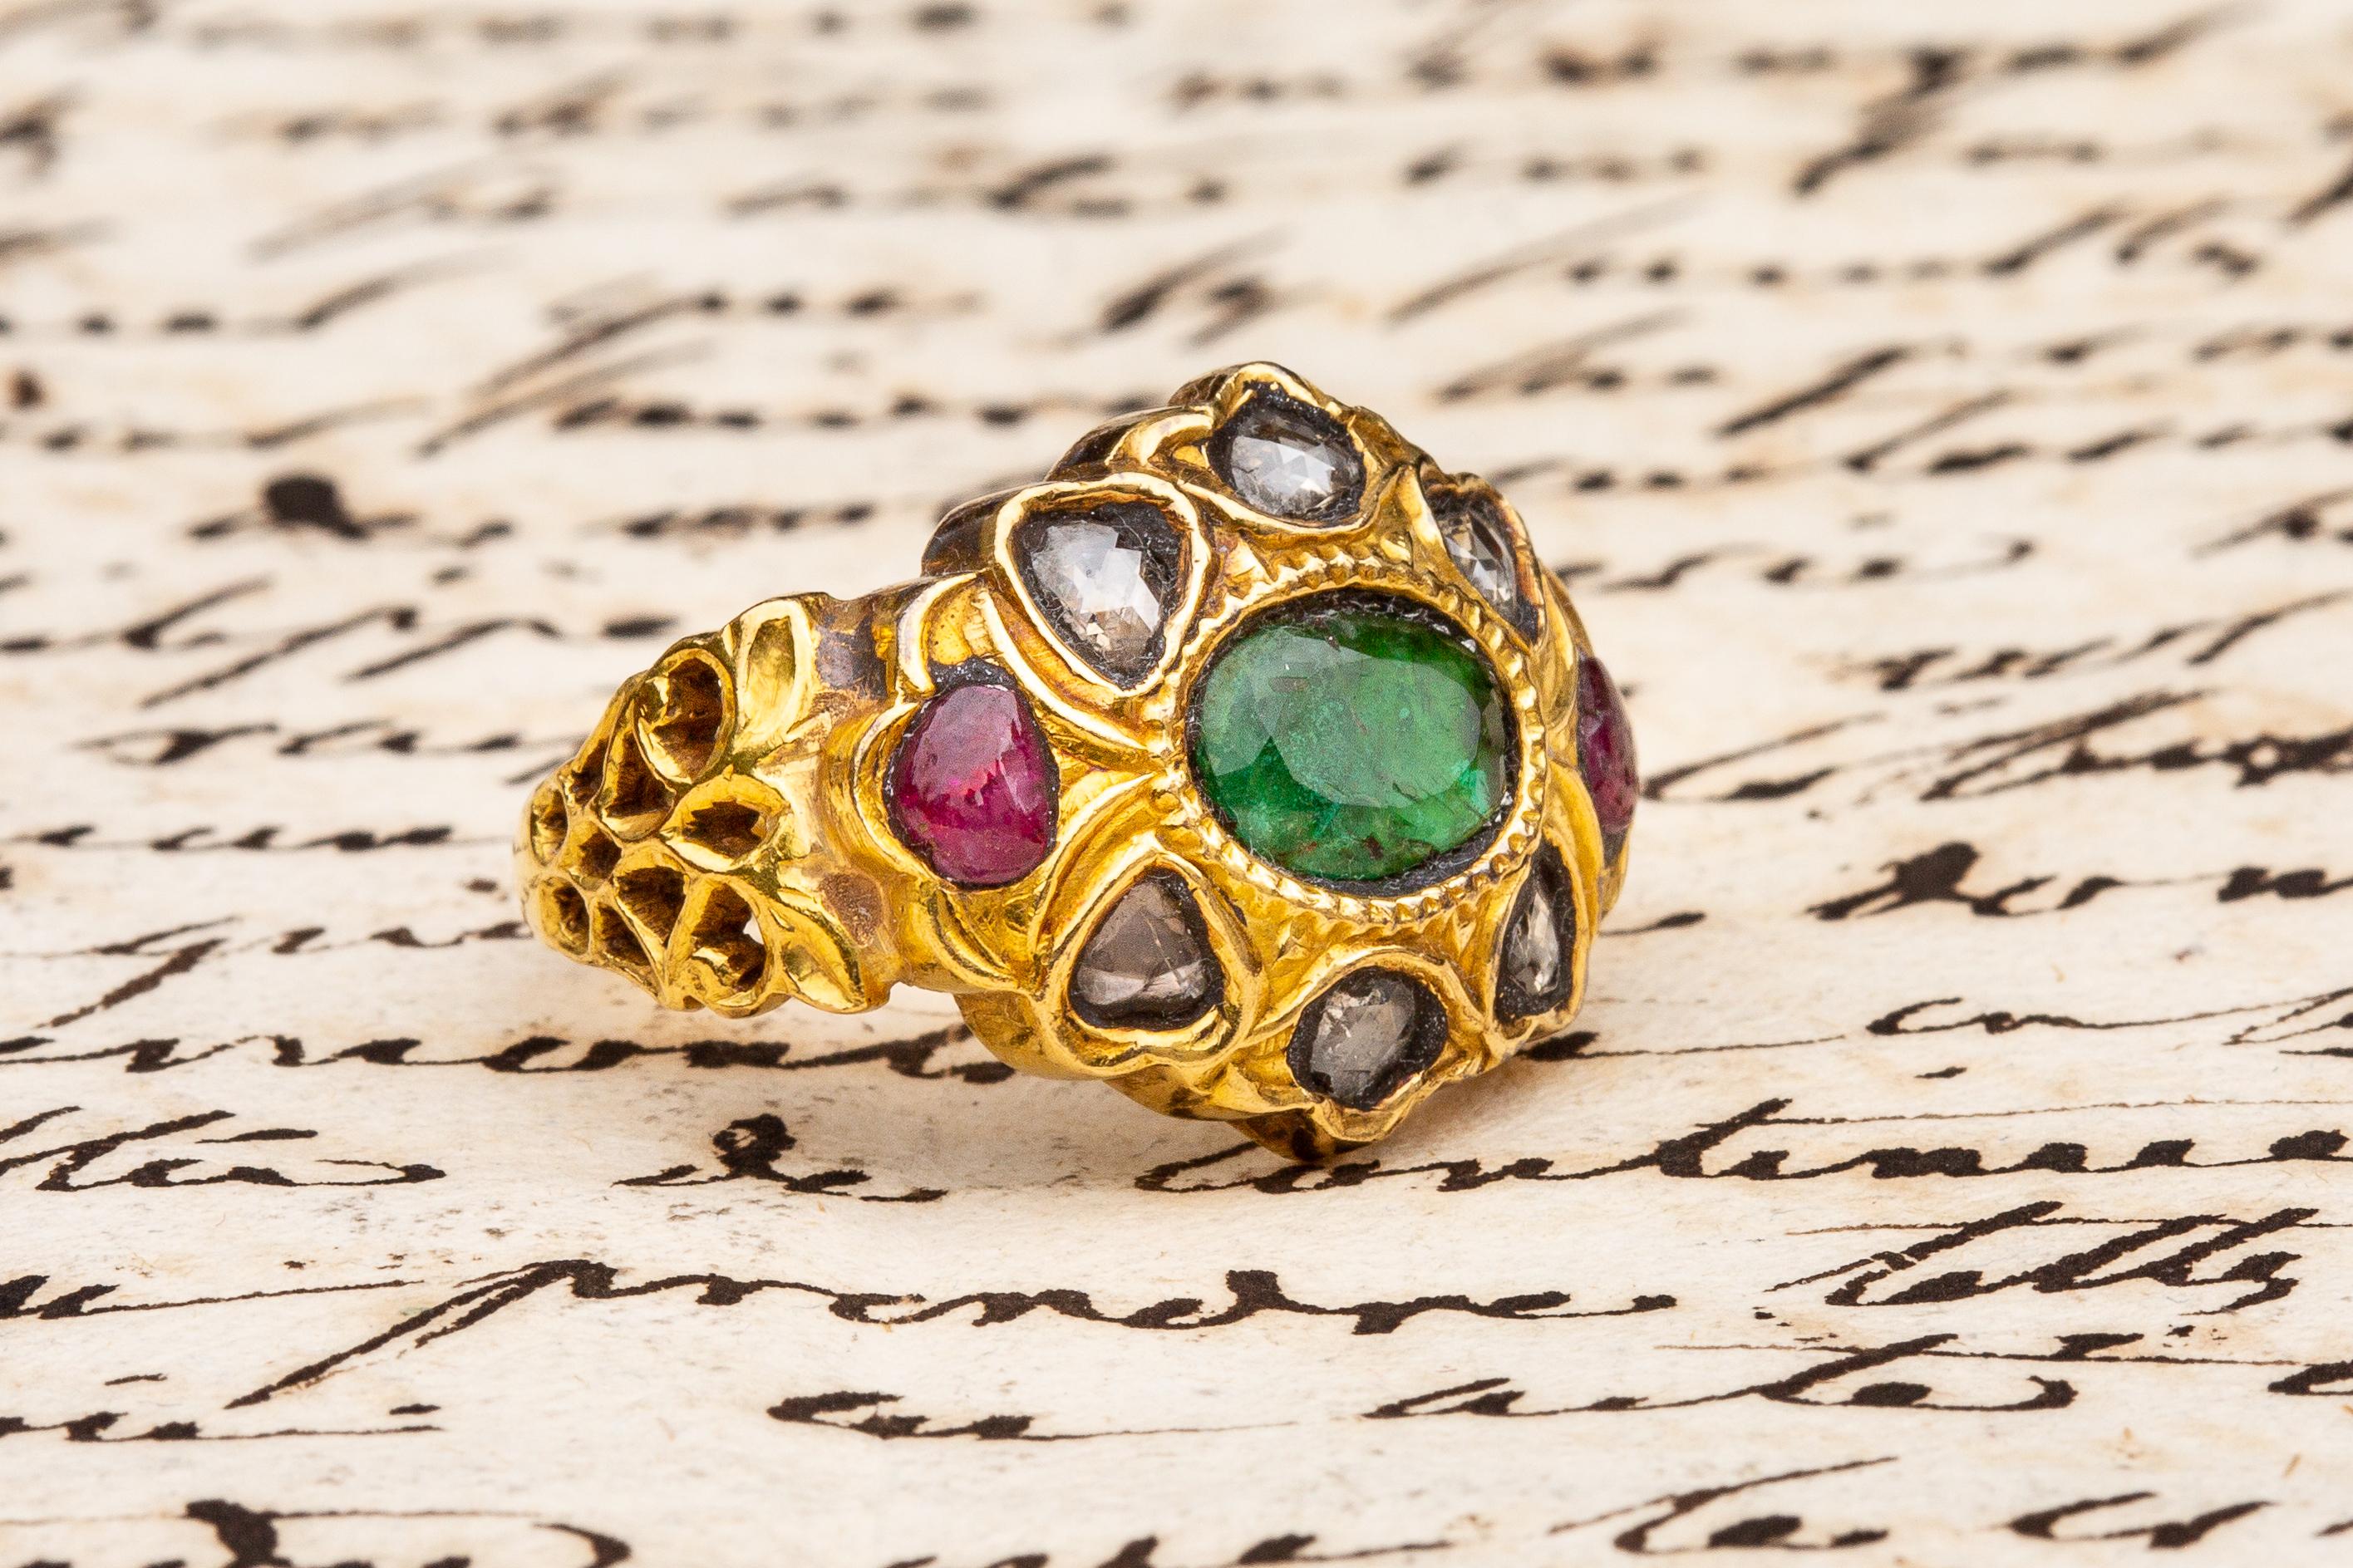 A scarce 19th century Indian emerald, ruby and diamond gold cluster ring, from Deccan or South India. The gem-set cluster takes a floral form, the central emerald is surrounded on all sides by cabochon rubies and flat-cut diamonds in foiled,